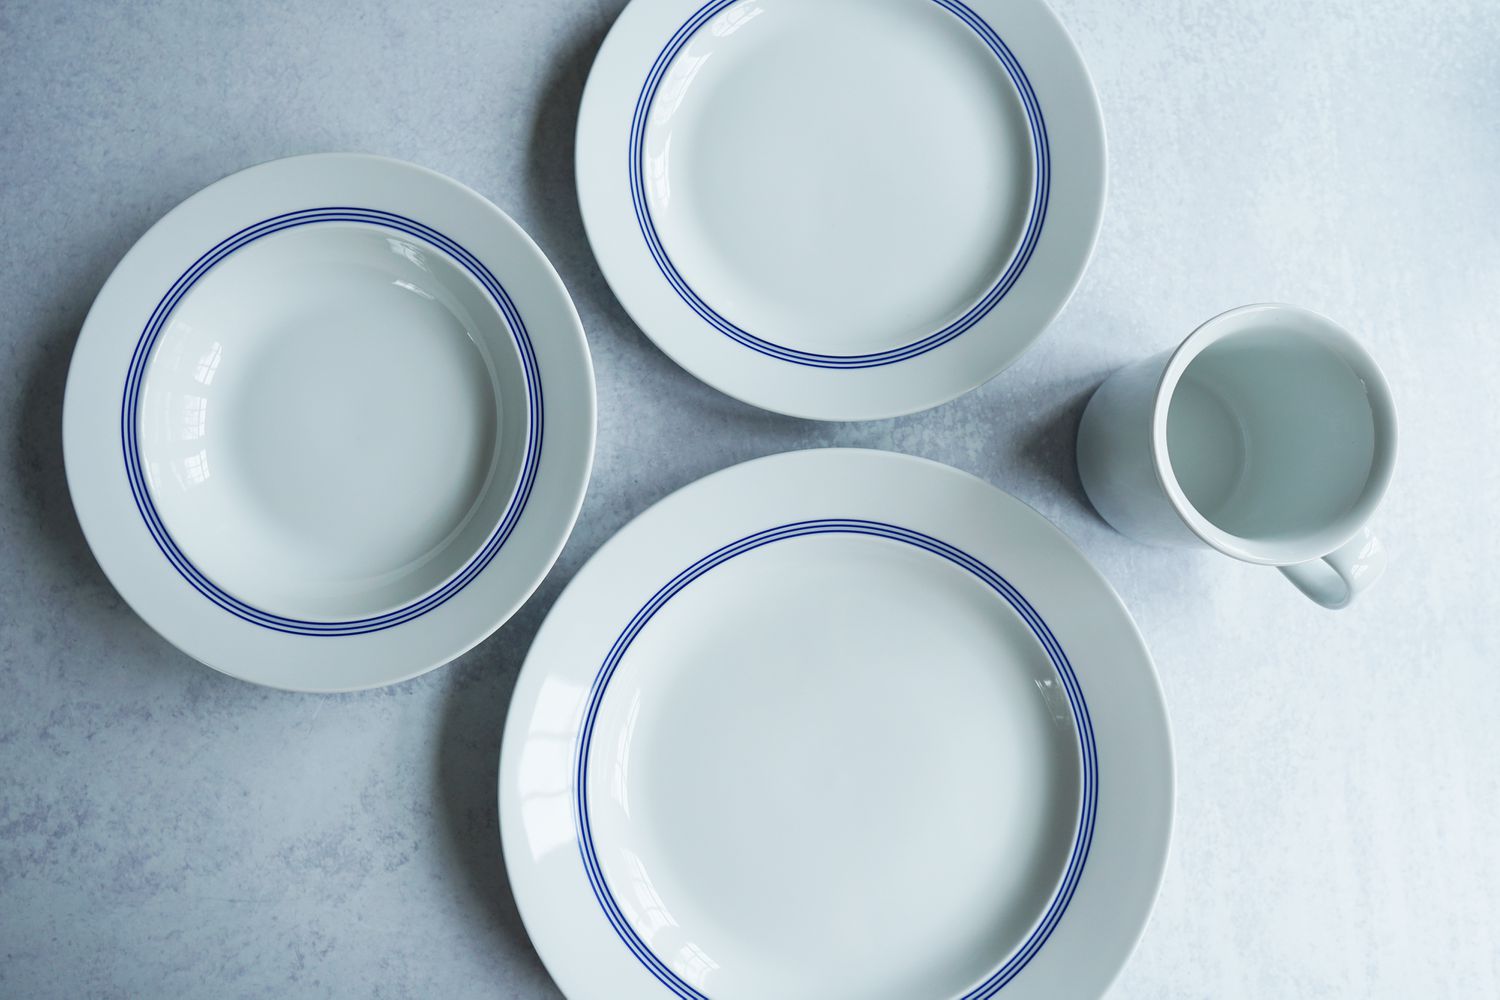 two plates, a bowl, and a mug on a grey surface